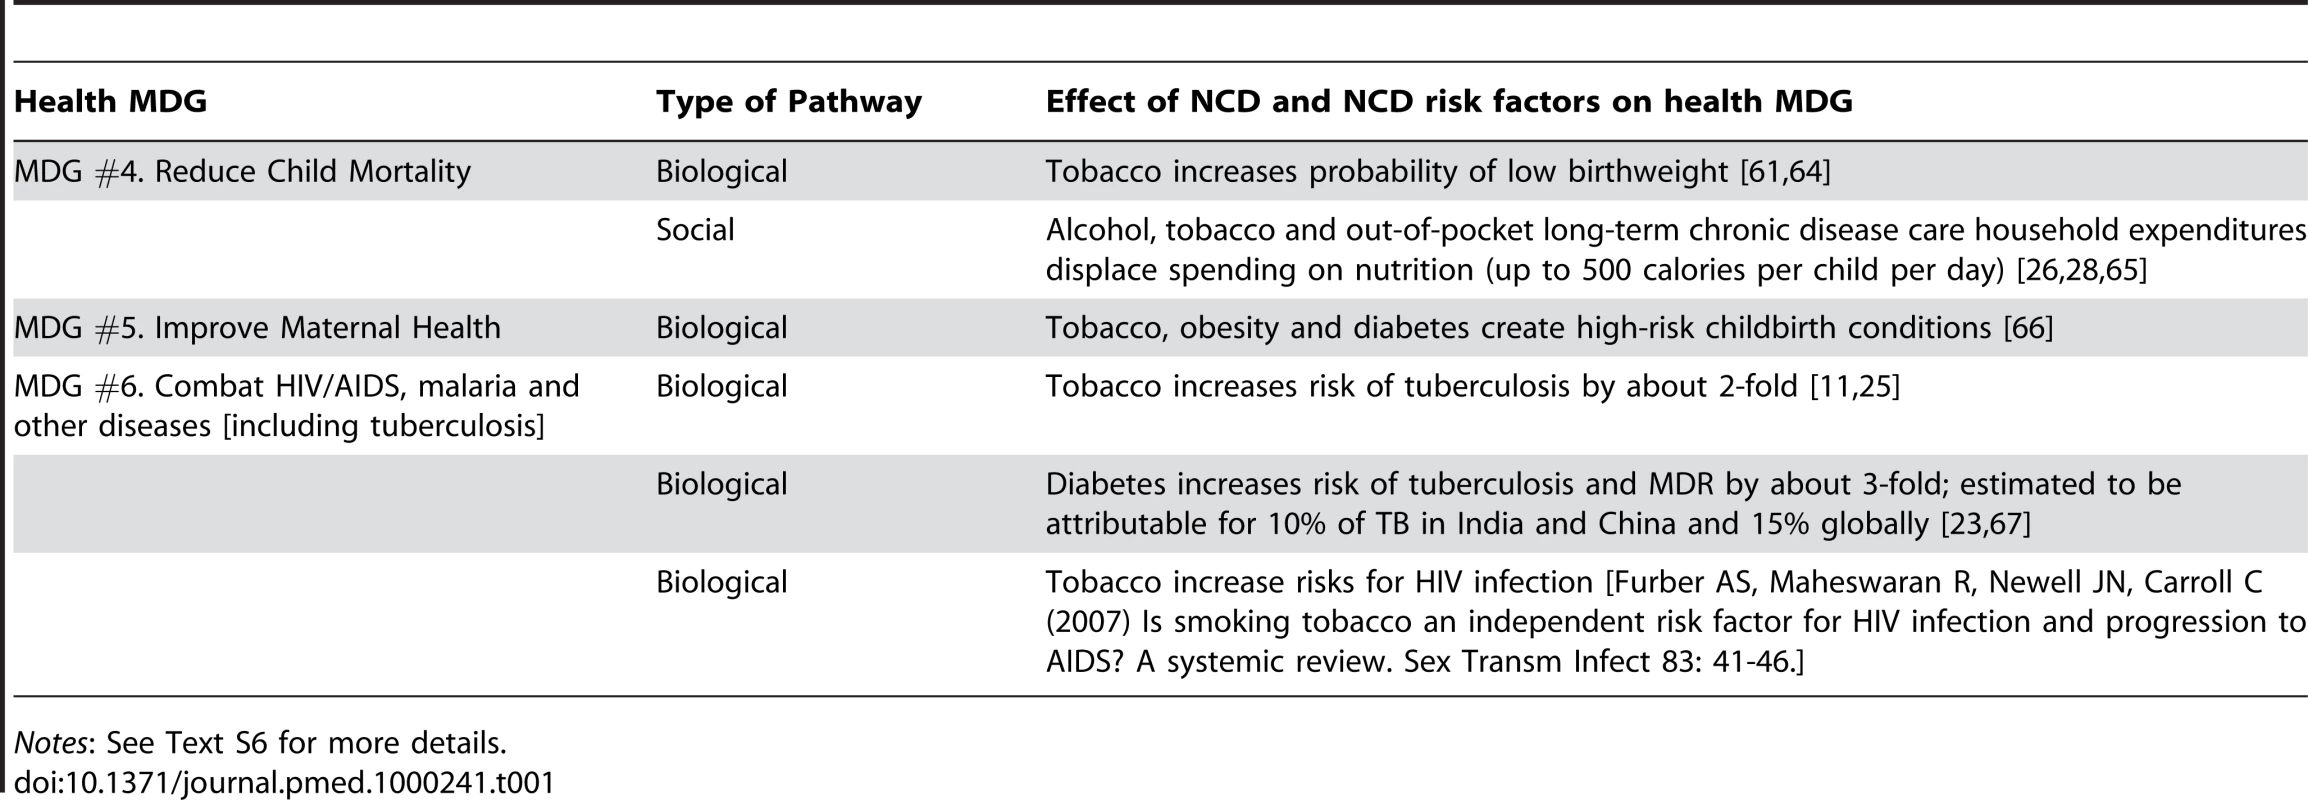 Selected Effects of NCDs and injuries and their risk factors on health MDGs.